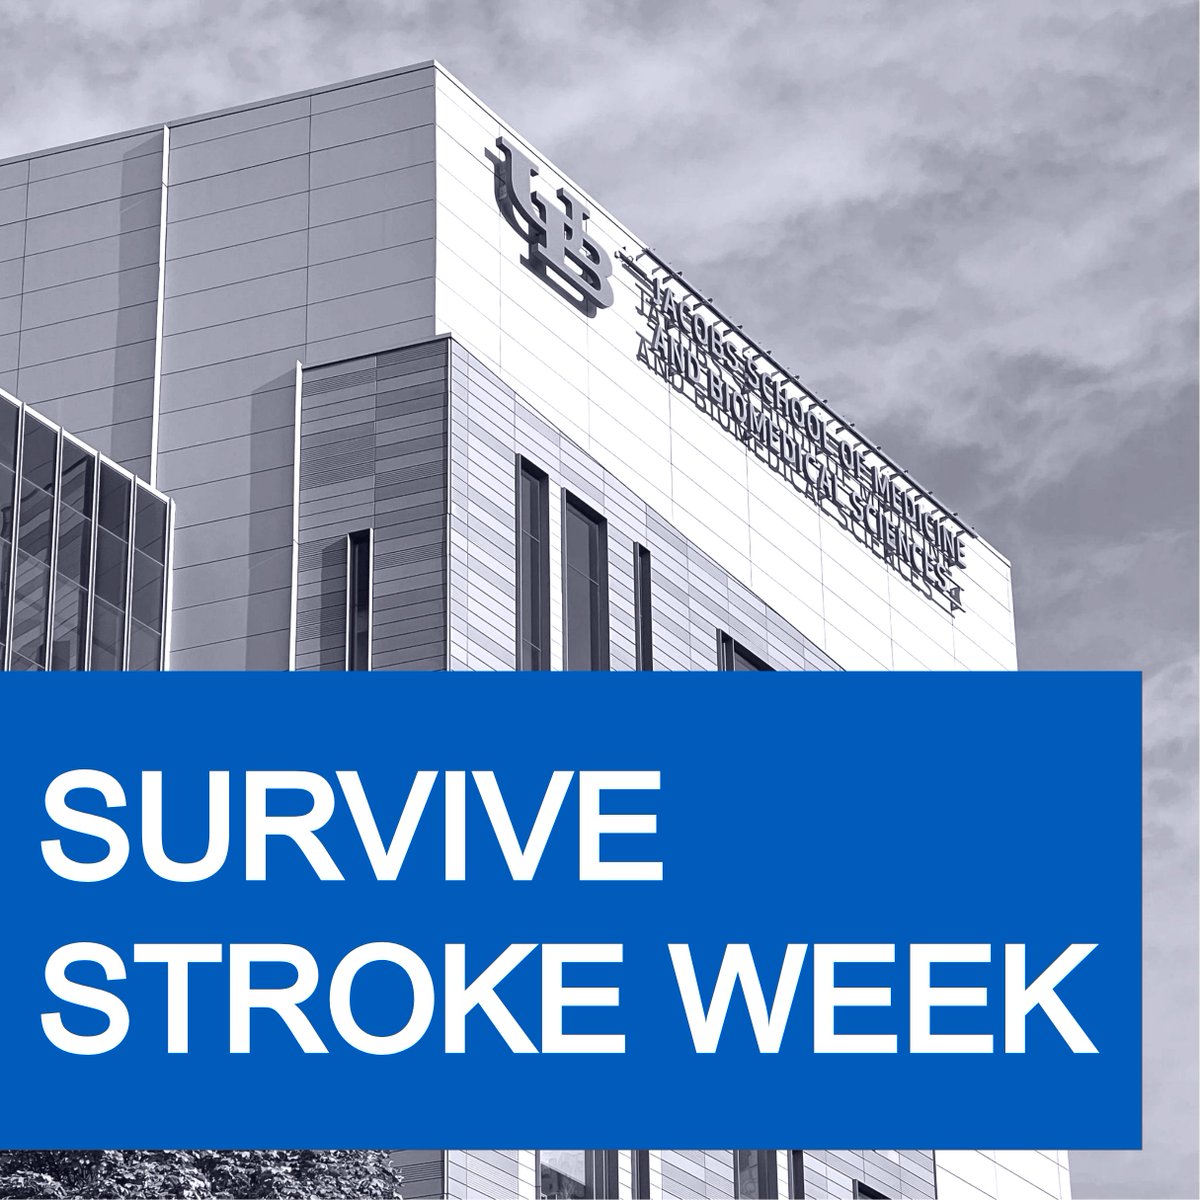 It’s #SurviveStroke Week & @SPECNews1BUF has featured the expertise of #UBuffalo faculty members Drs. Snyder & Kandel. » Snyder discussed #stroke symptoms: buff.ly/3Wwhd8f » Kandel said to take immediate action: buff.ly/4dNKFNl » Plus, check out @SurviveStroke